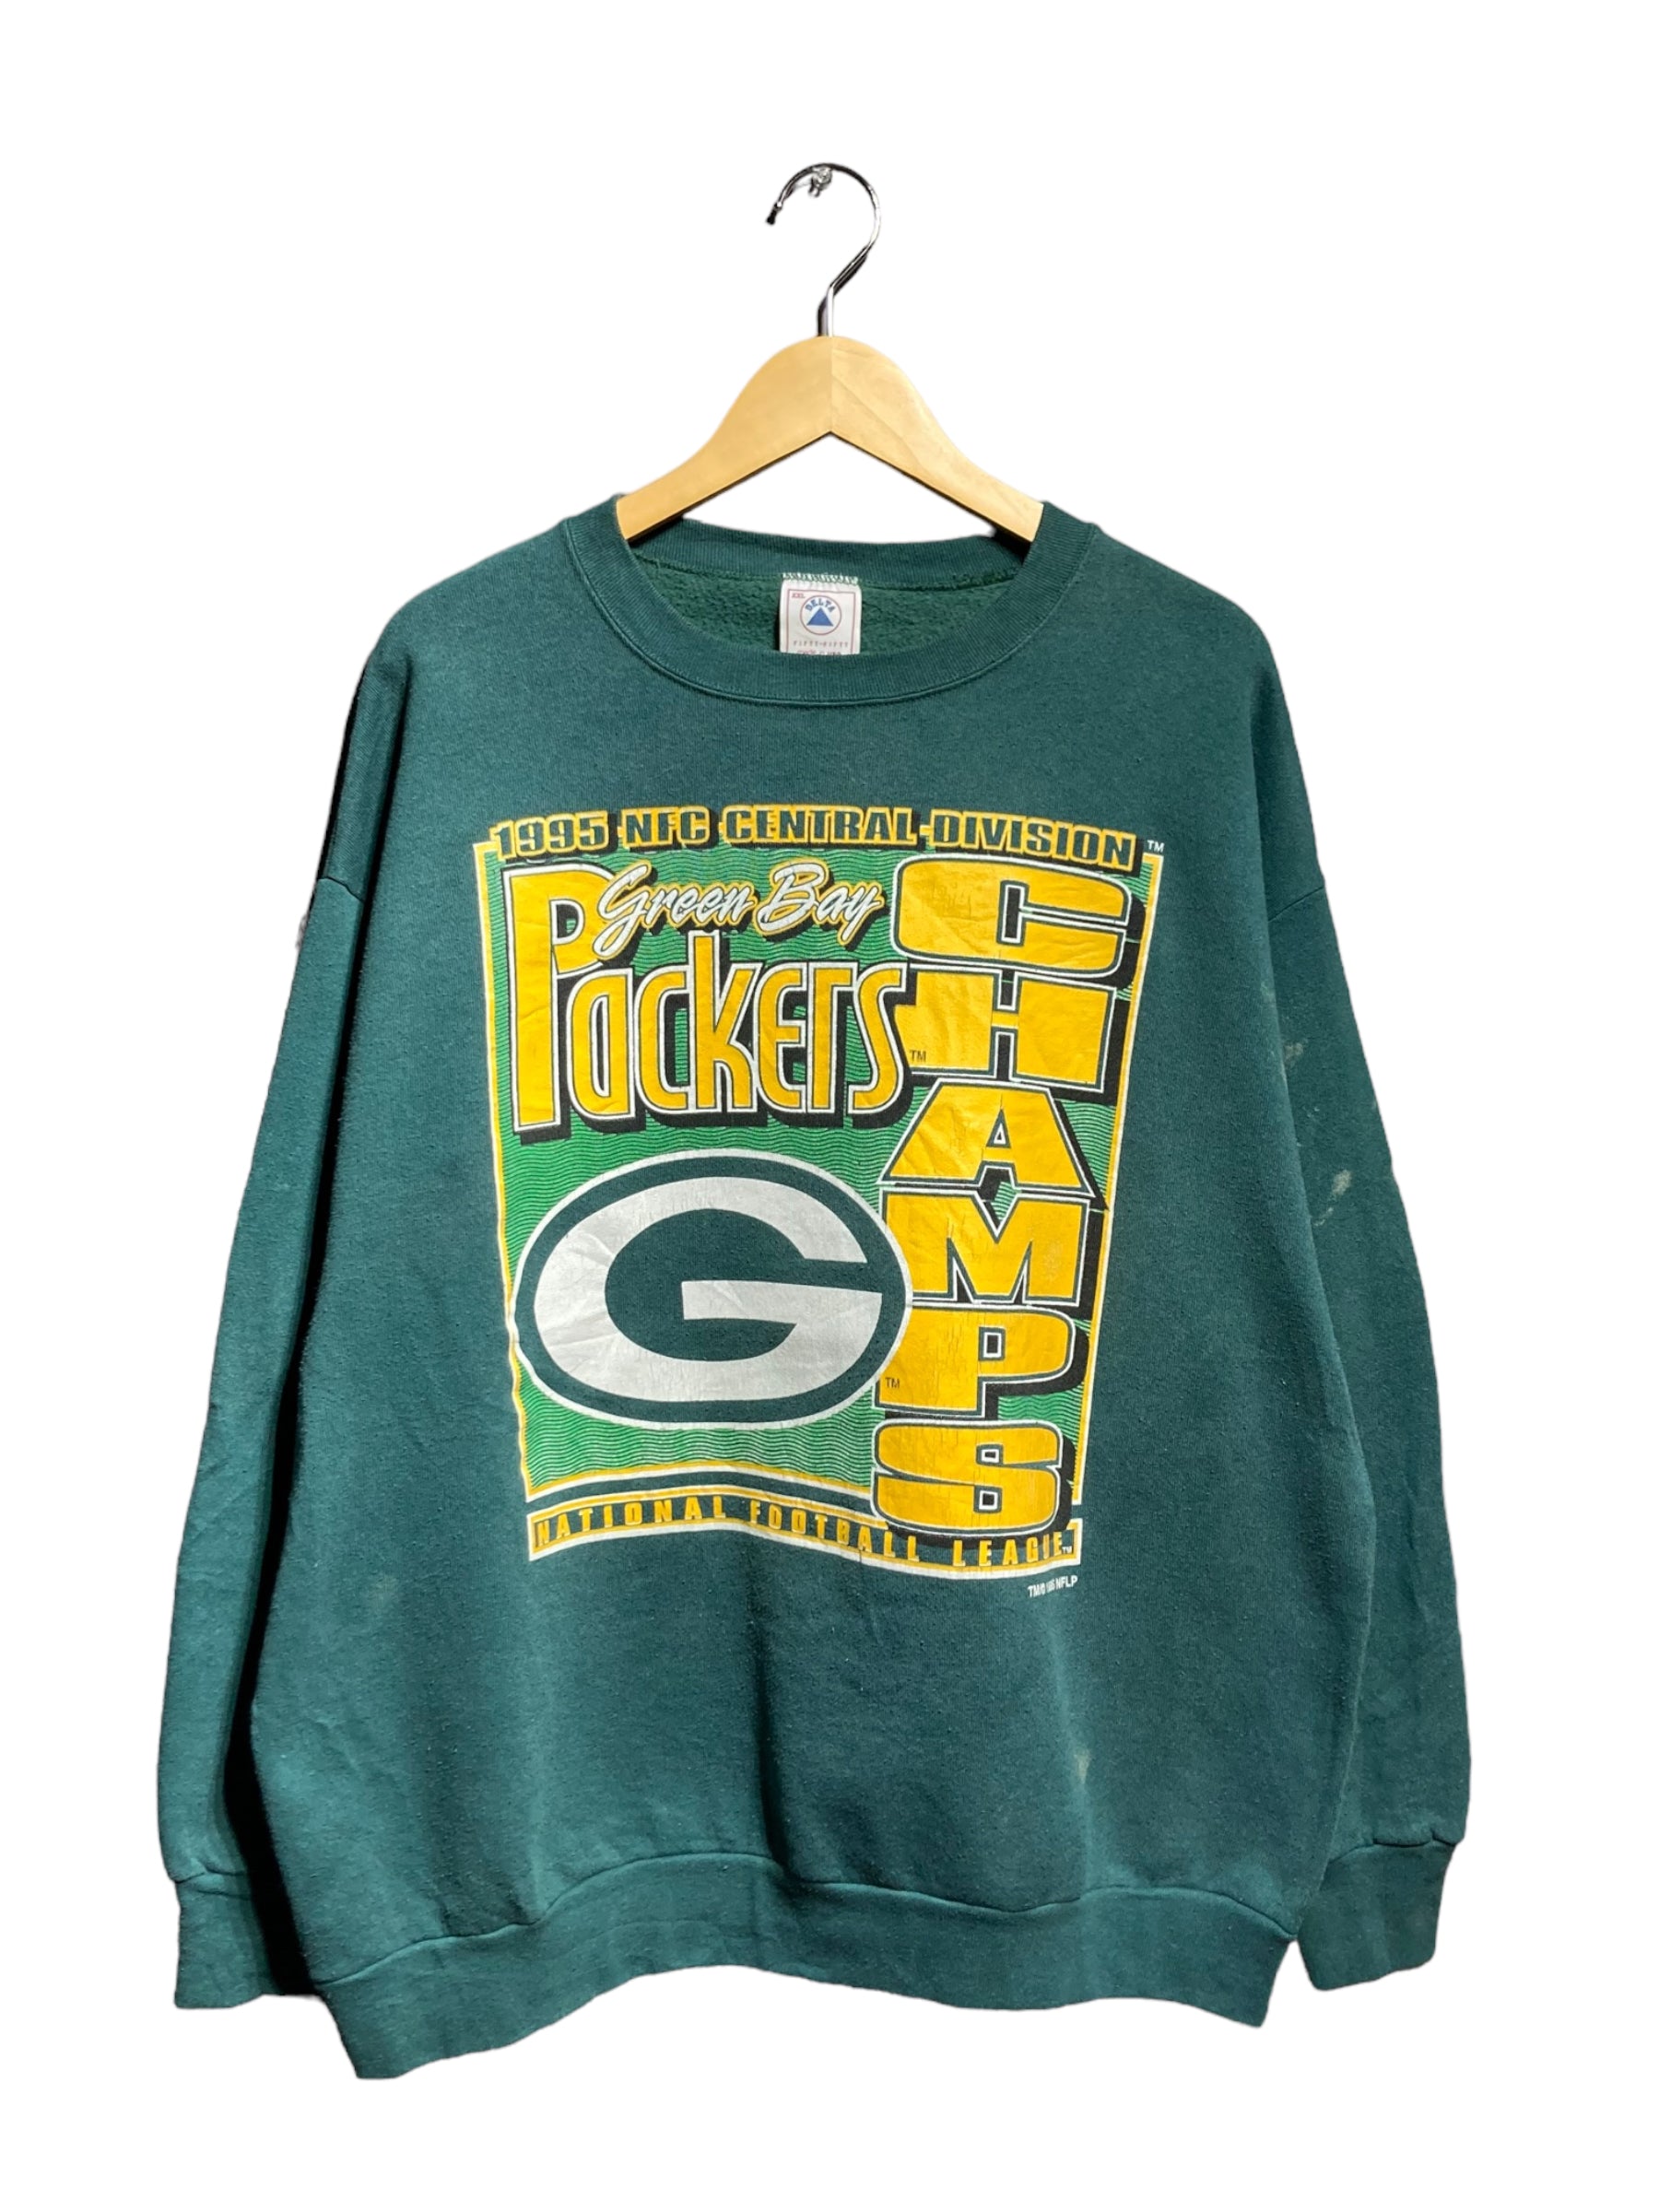 90s NFL packers パッガーズ アメフト スウェット グリーン